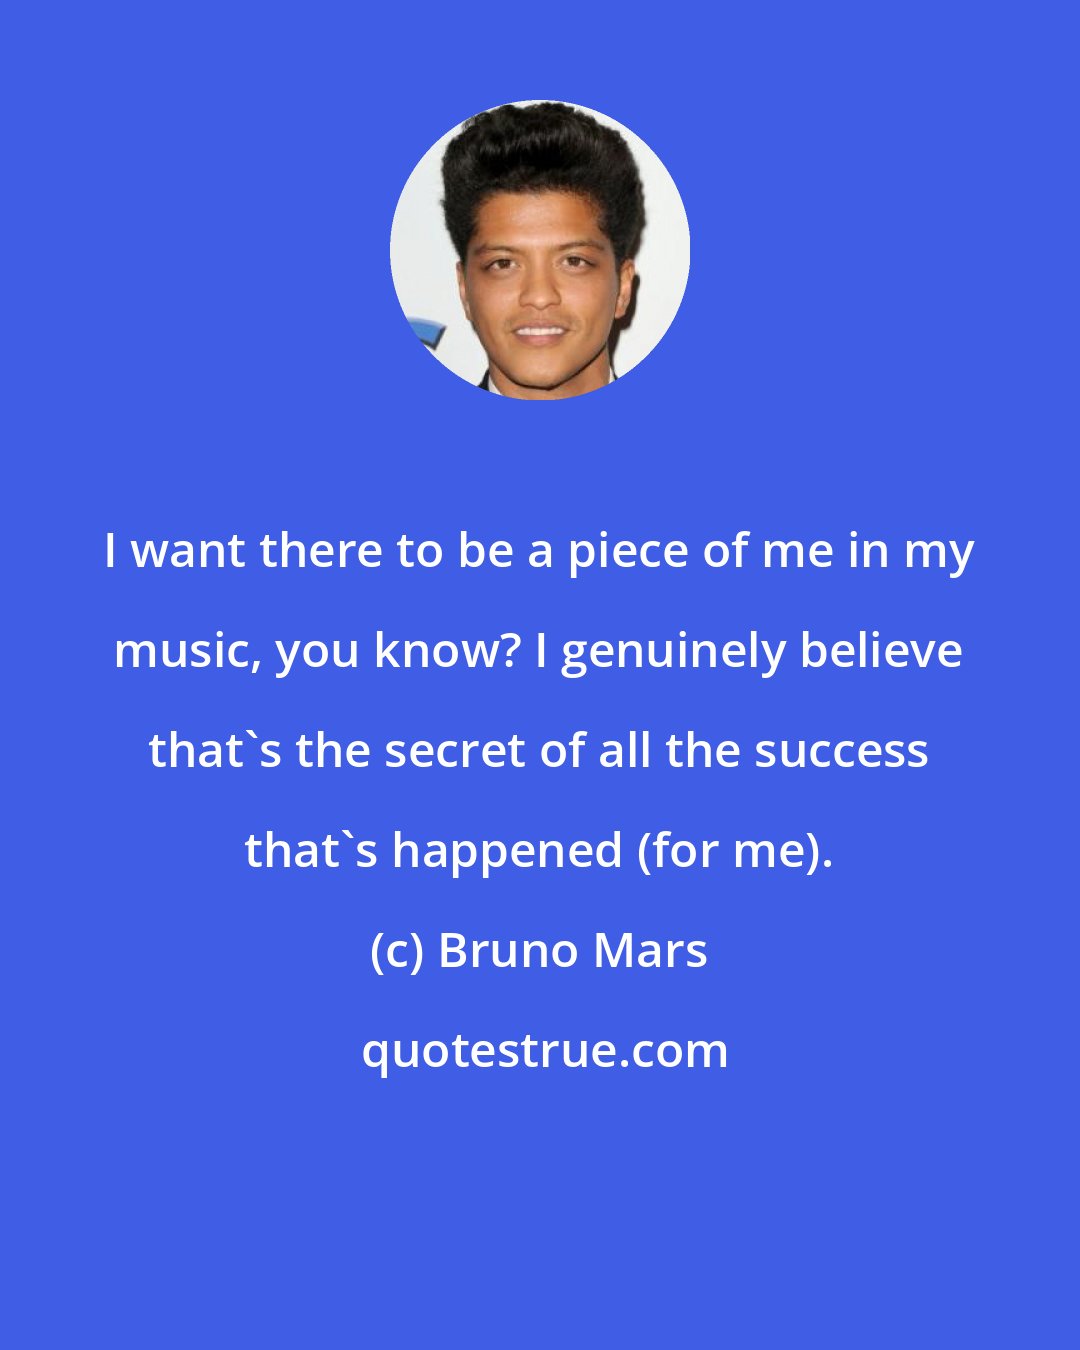 Bruno Mars: I want there to be a piece of me in my music, you know? I genuinely believe that's the secret of all the success that's happened (for me).